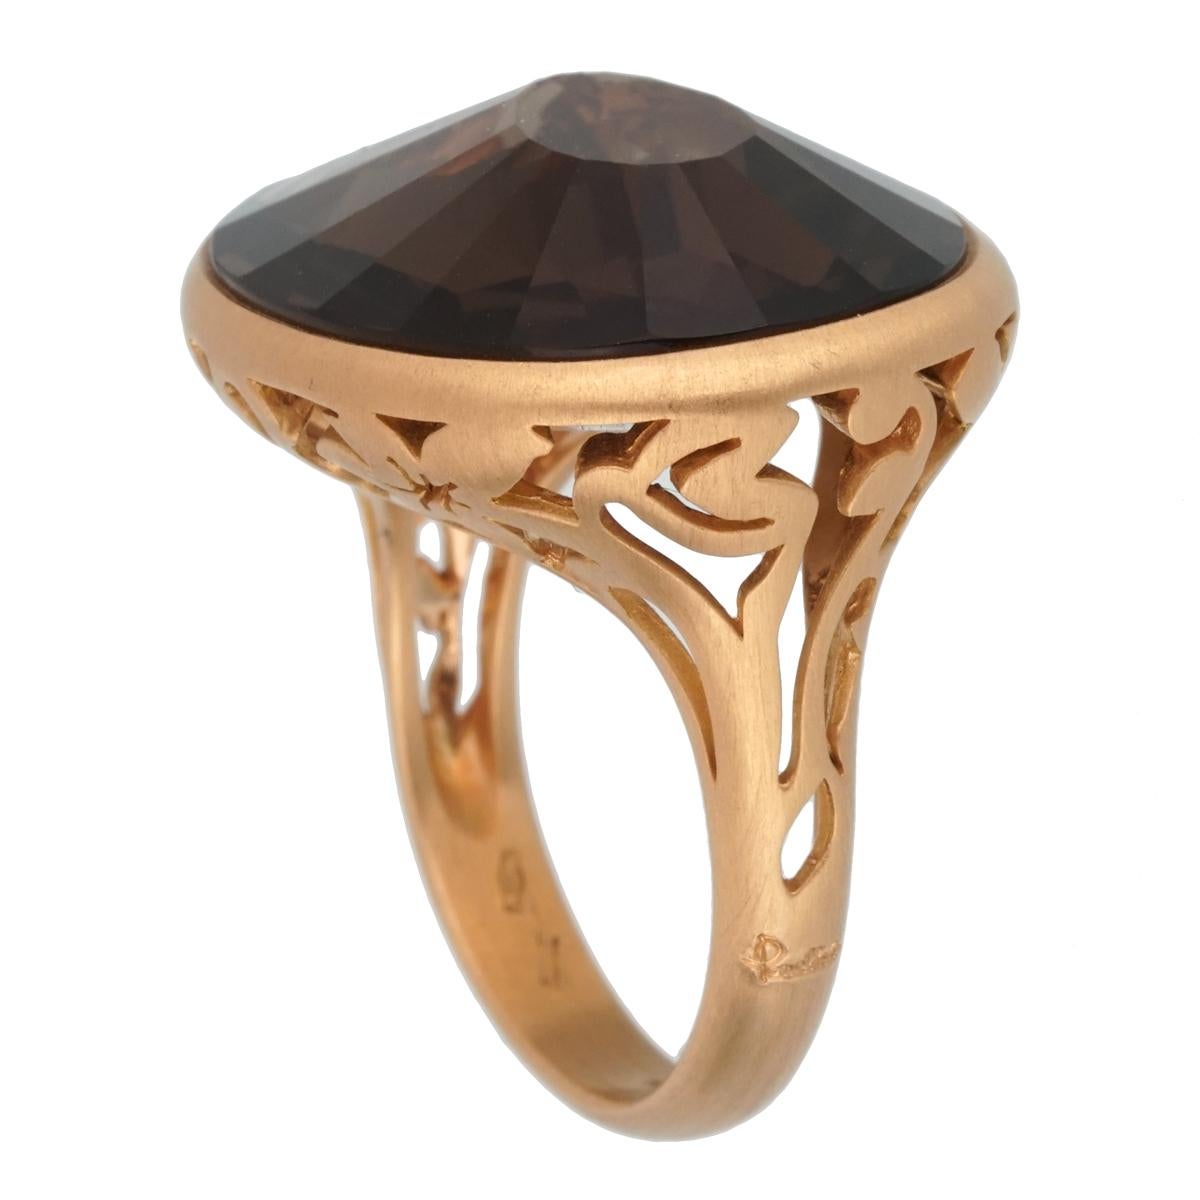 A chic brand new Pomellato cocktail ring showcasing a 10.19ct Smoky Quartz set in 18k rose gold. The ring measures a size 7.5 and can be resized

Pomellato Retail: $4600
Sku: 2452